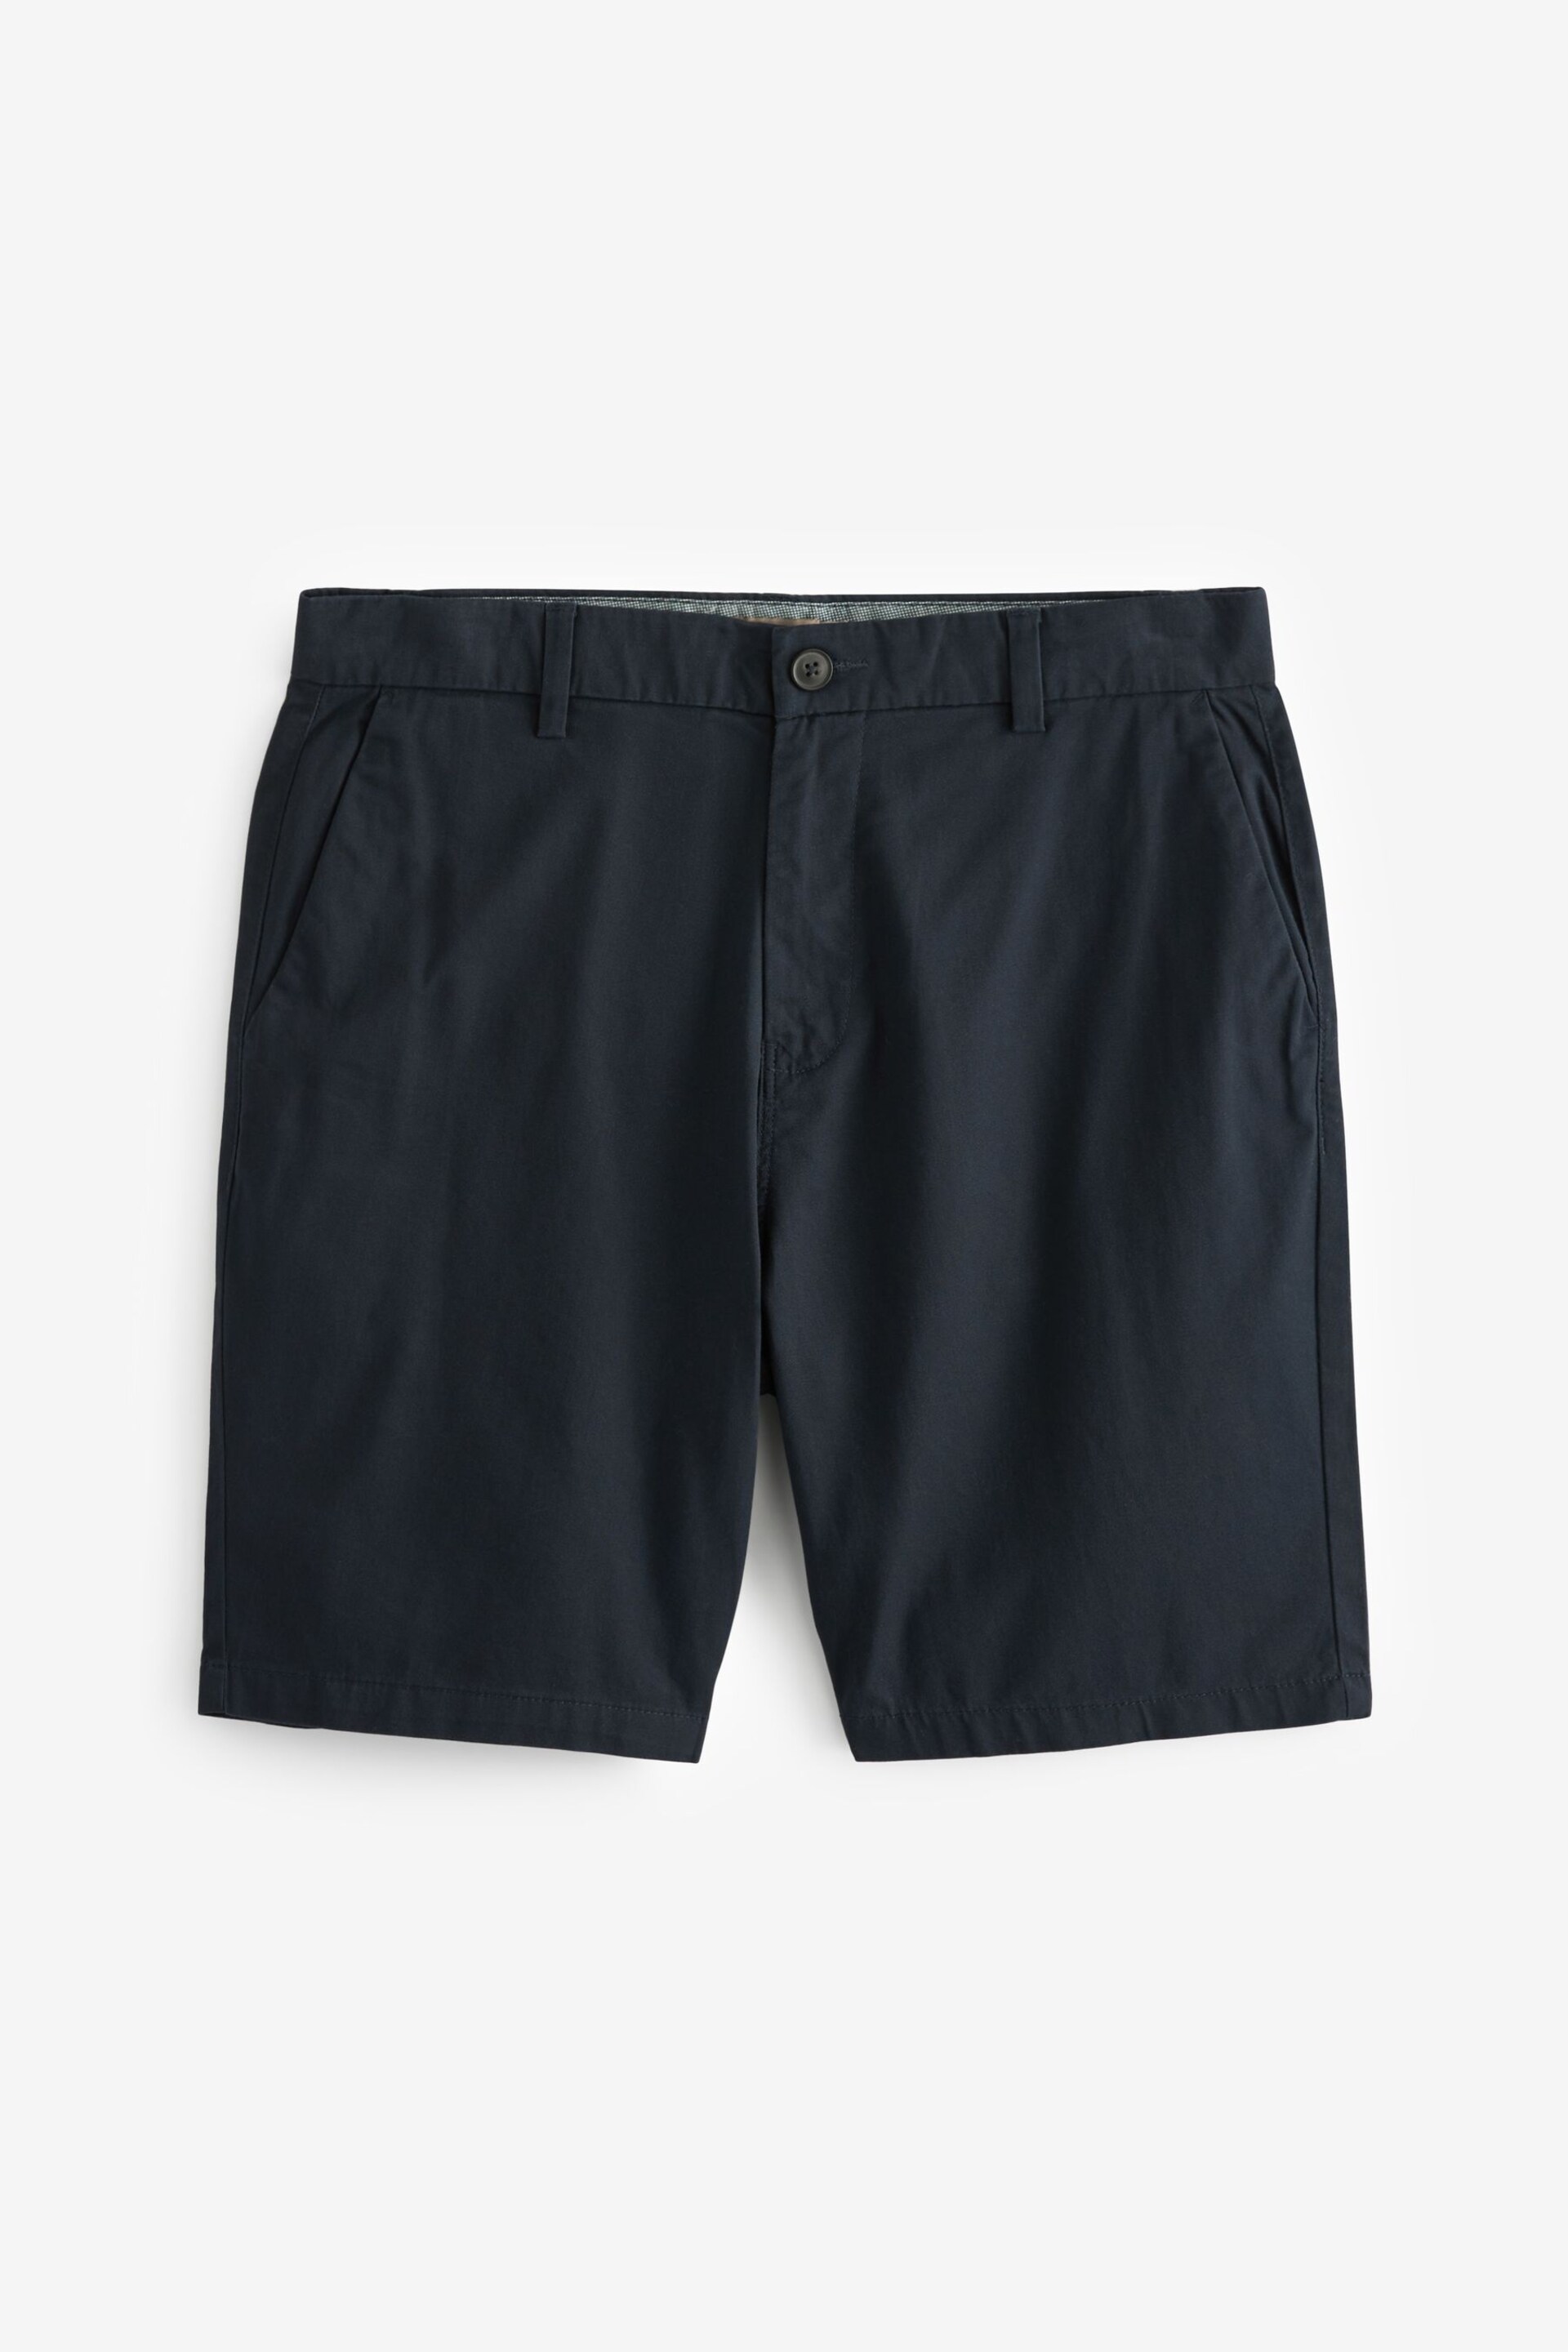 Navy Blue/Grey/Stone Straight Stretch Chinos Shorts 3 Pack - Image 2 of 11